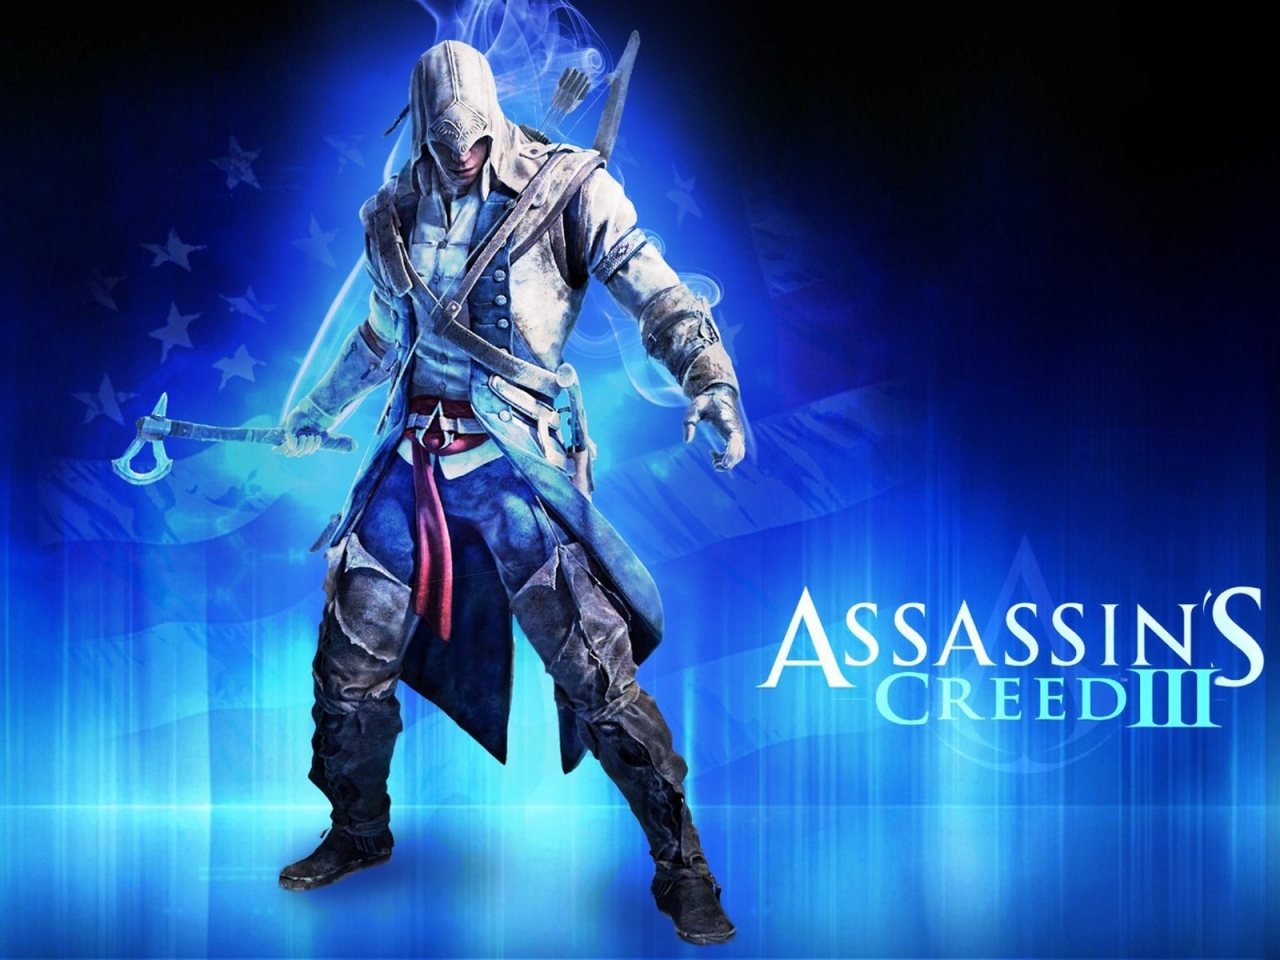 Assassin Creed III for 1280 x 960 resolution